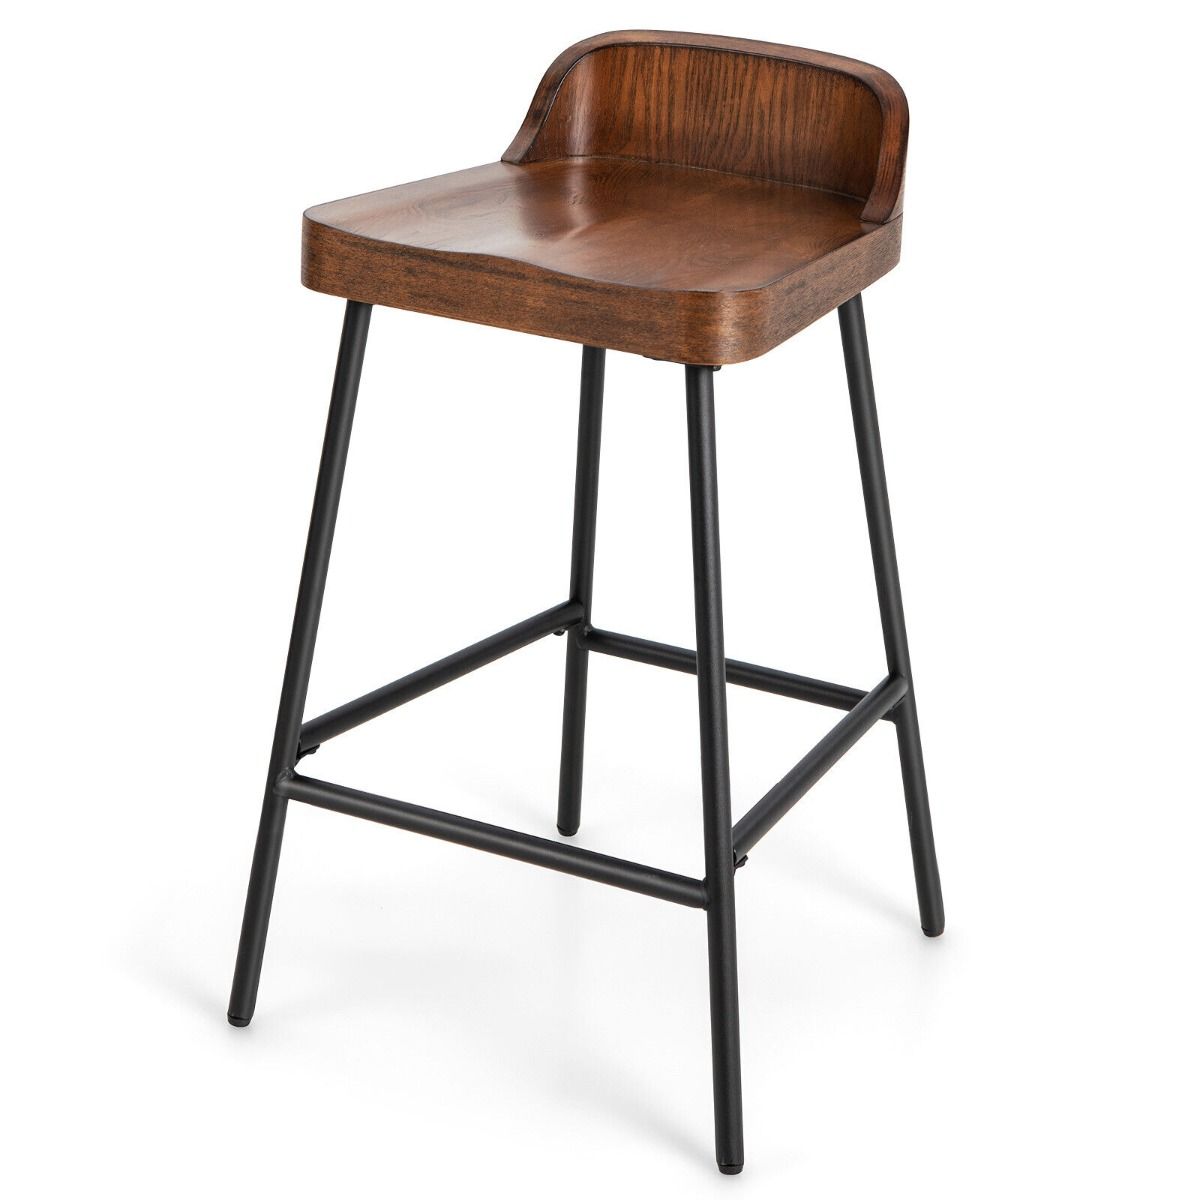 Low-Back Bar Stool with Backrest Footrest and Saddle Seat for Kitchen Pub